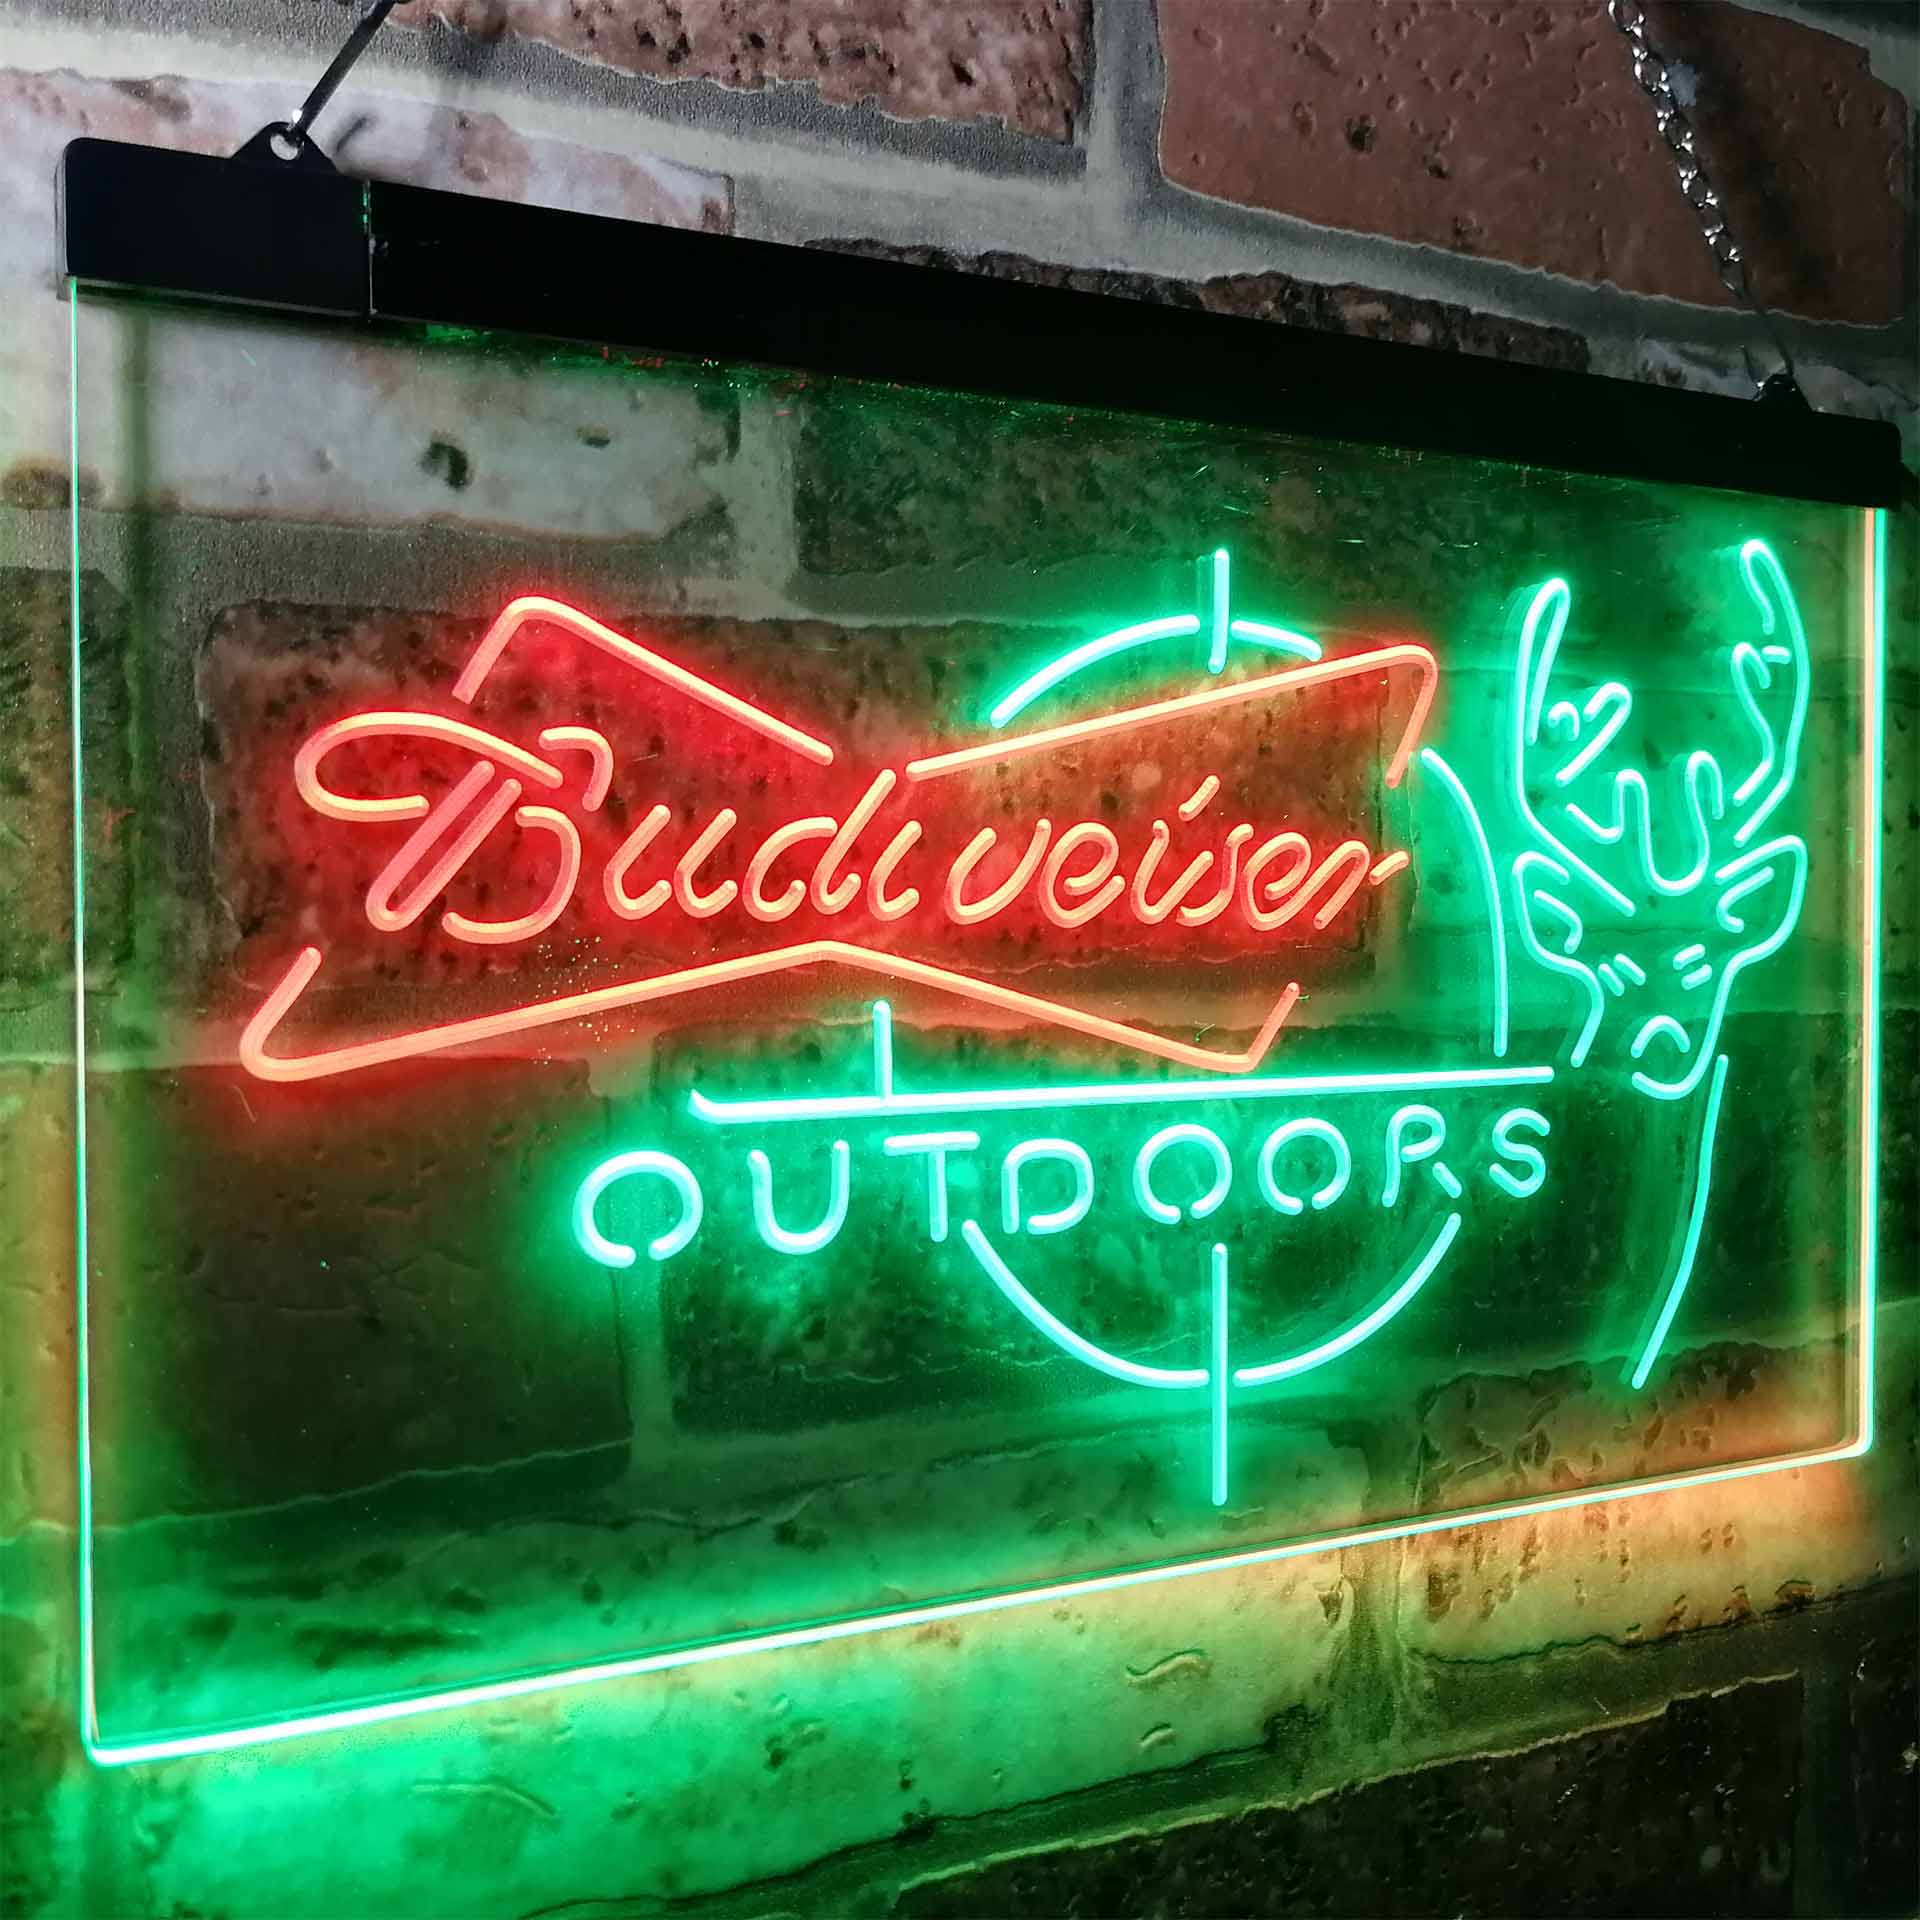 Budweisers Outdoor Hunting Cabin Deer Decor LED Neon Sign